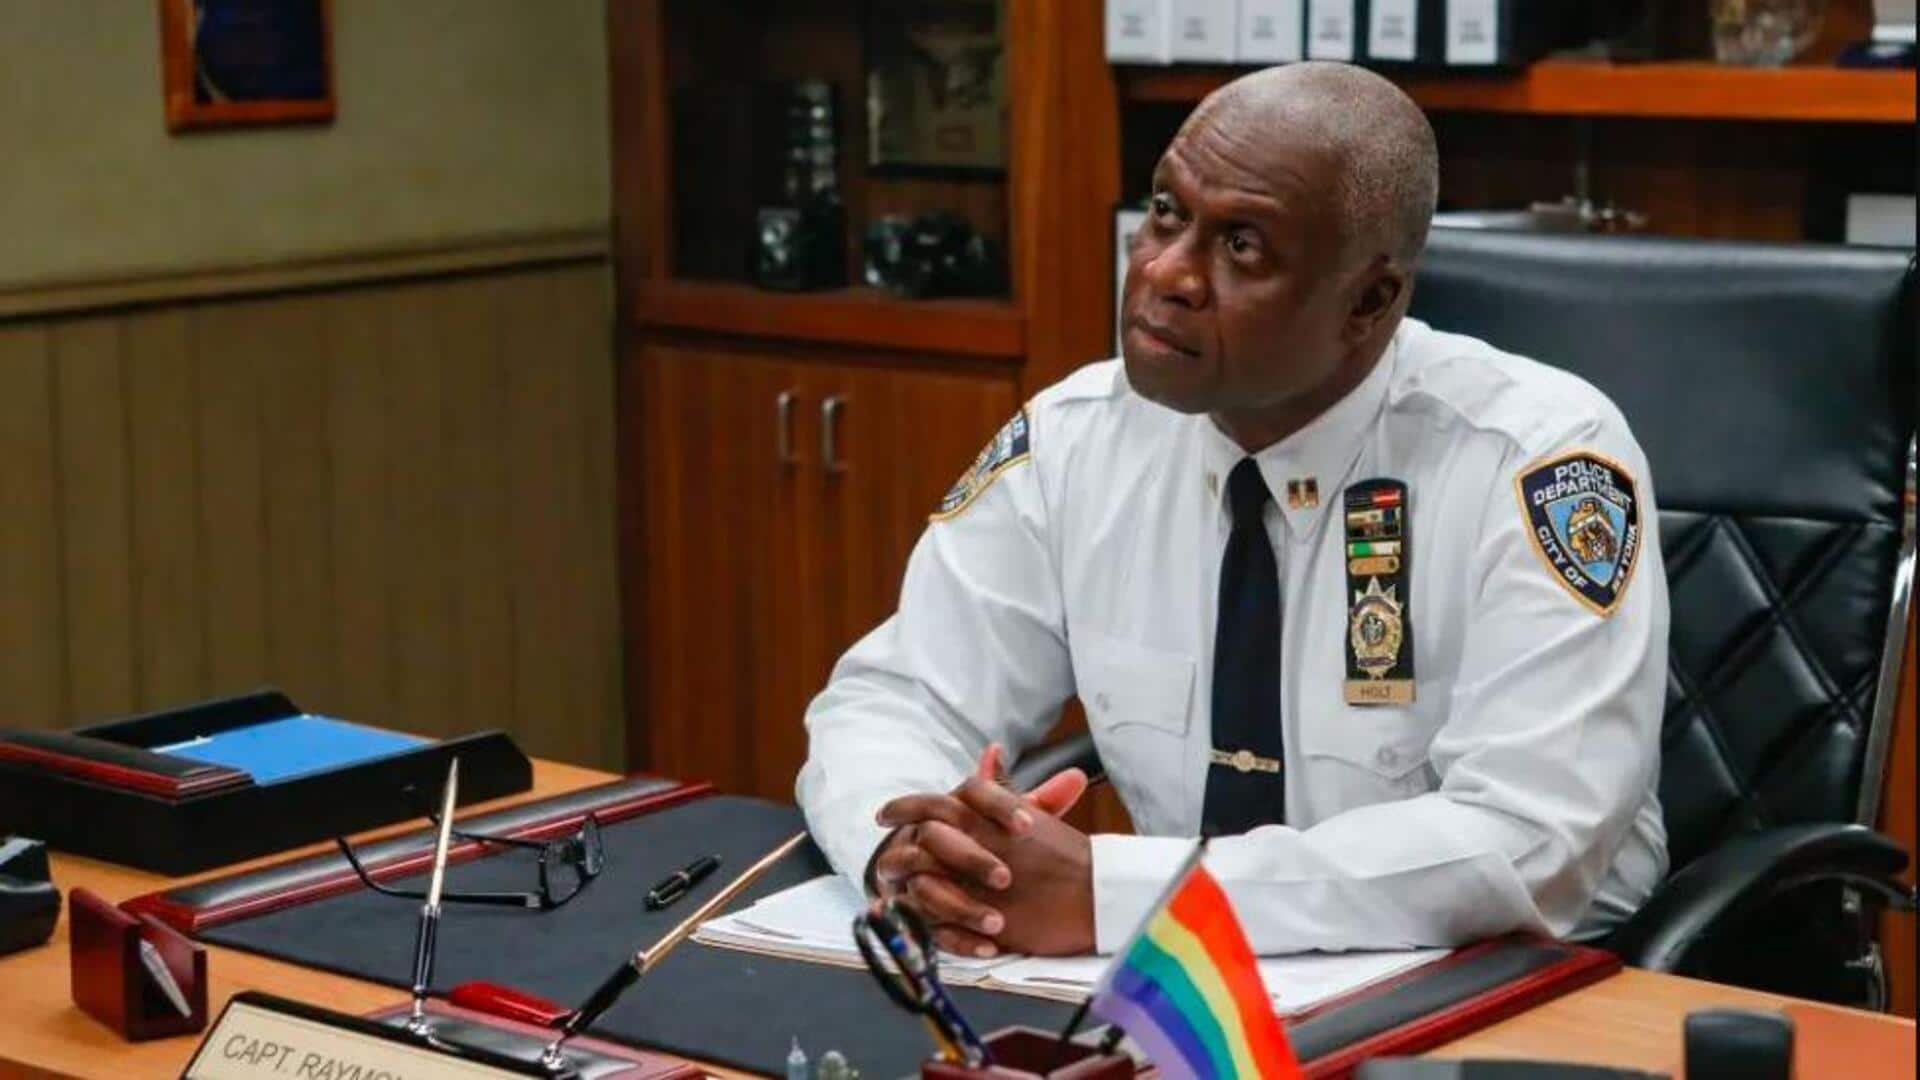 Life lessons that Captain Holt aka André Braugher taught us